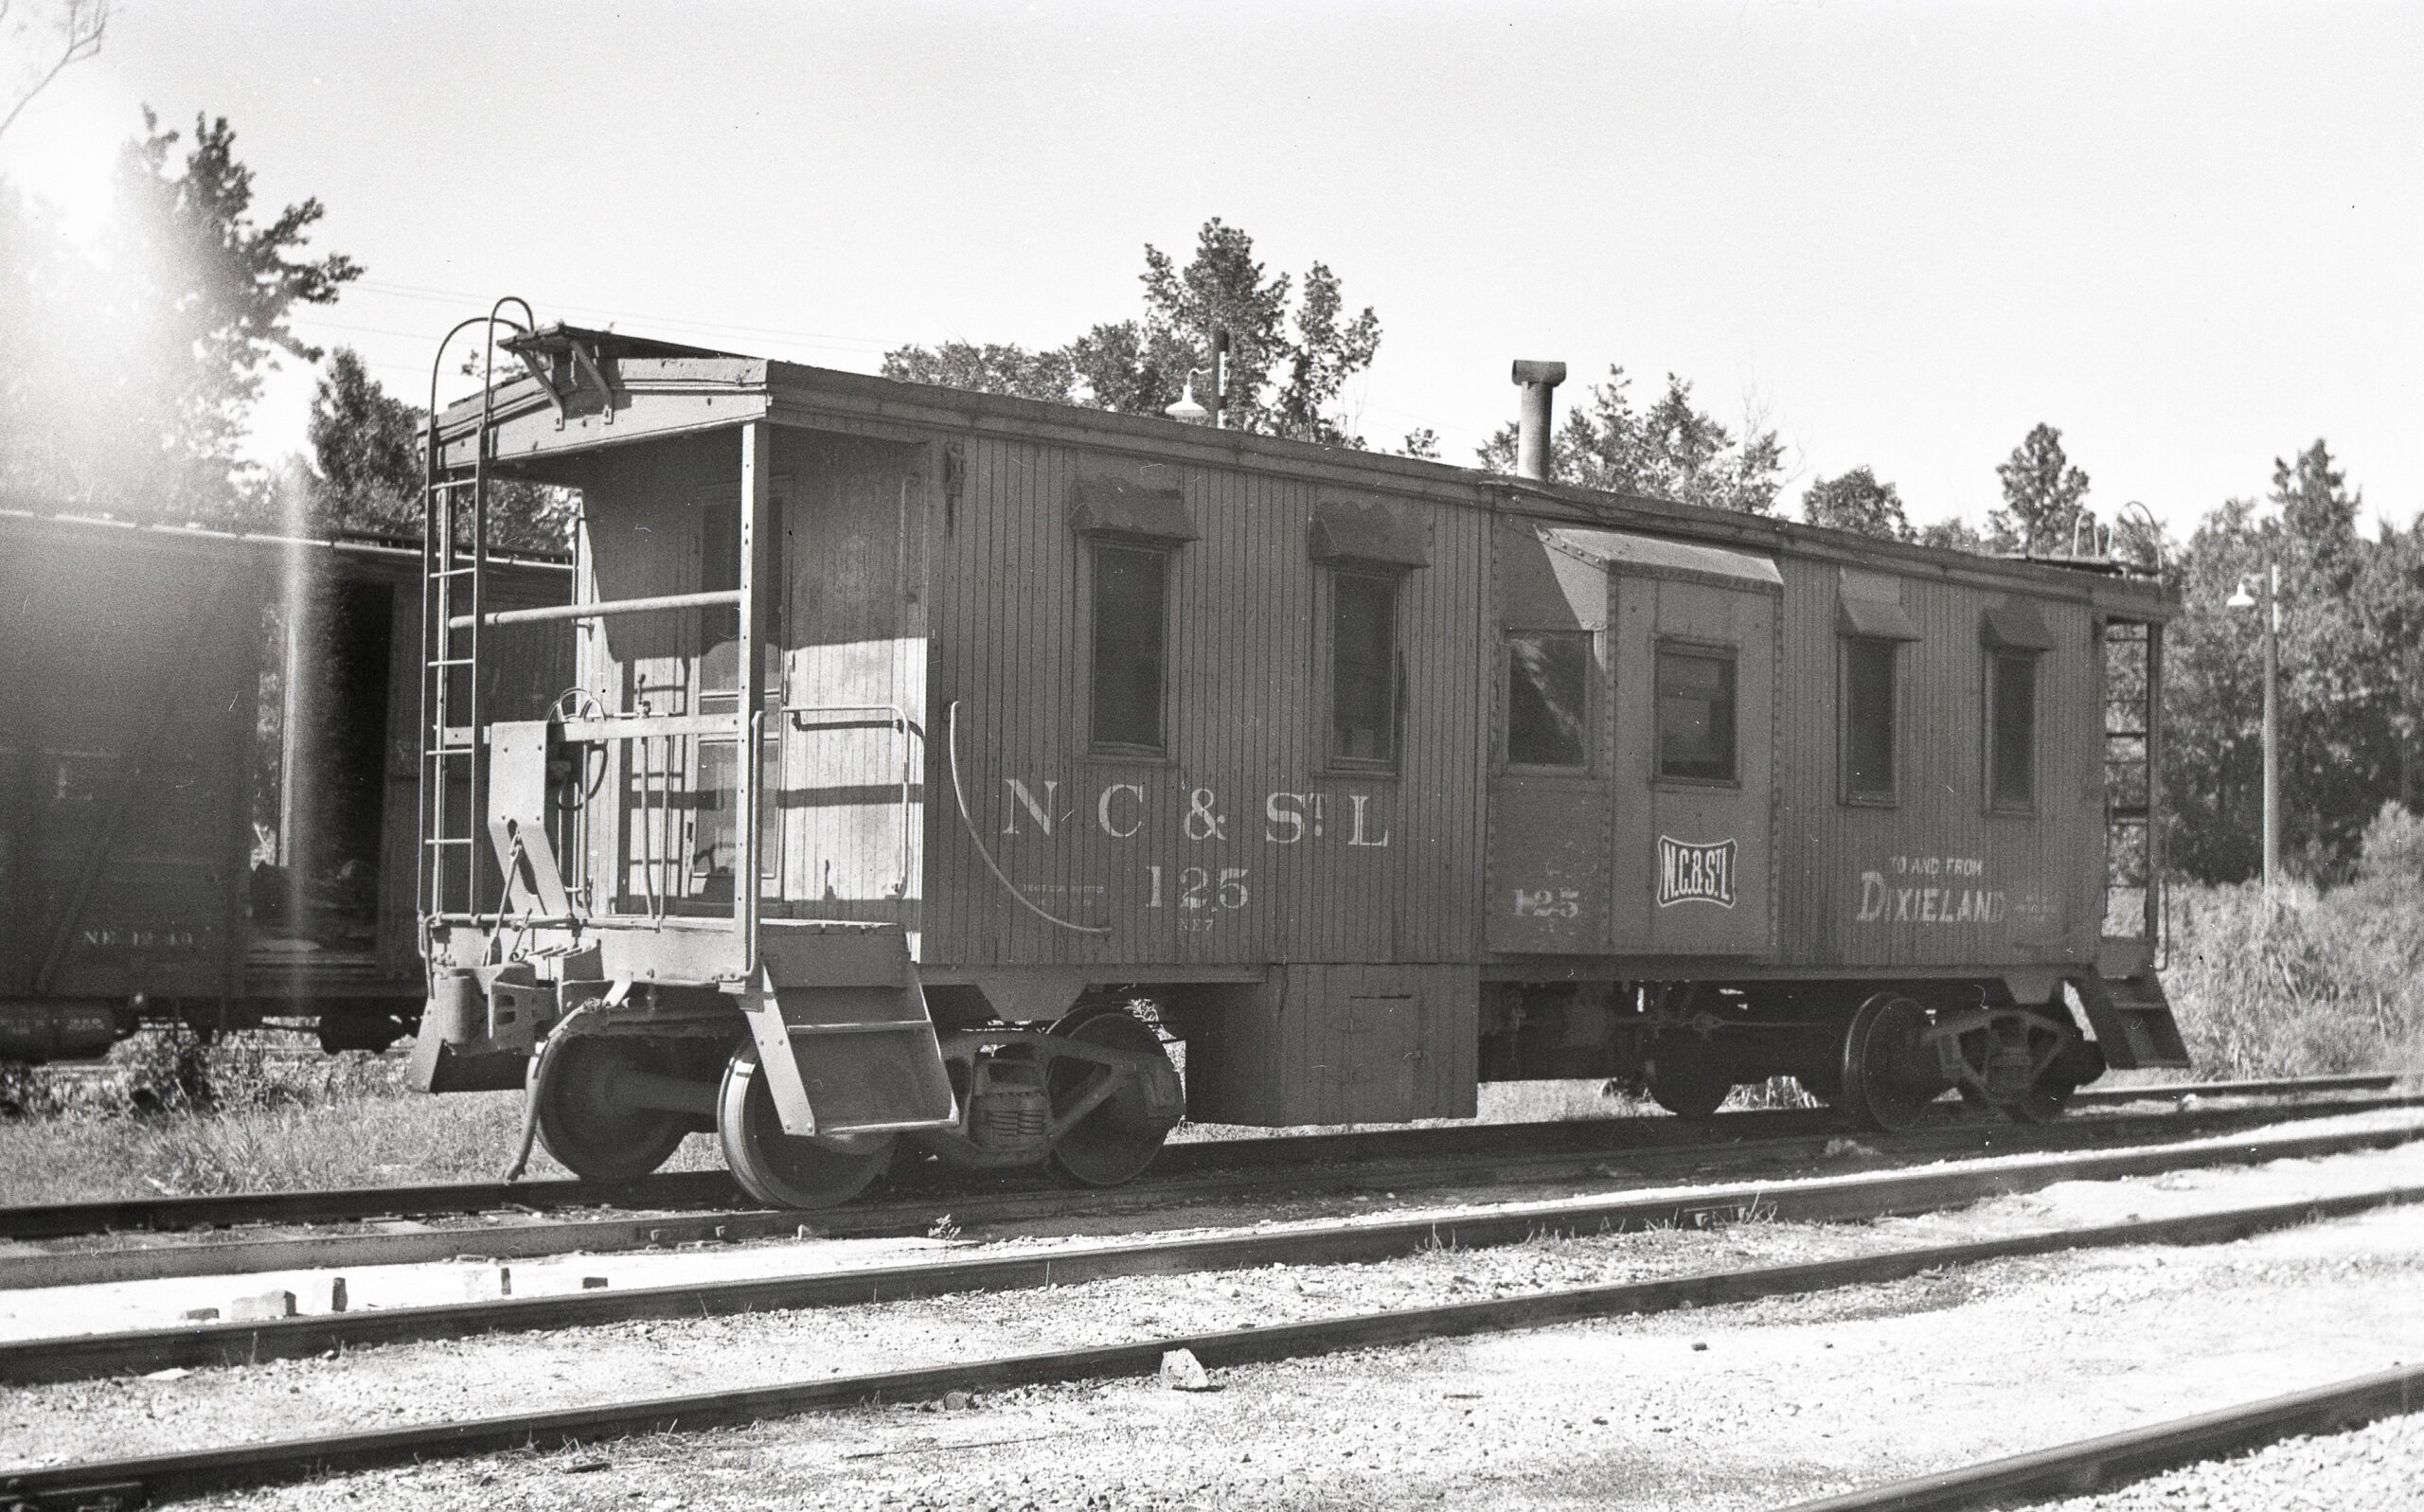 Nashville Chattanooga and Saint Louis Railway | Louisville and Nashville | Sterling, Kentucky | Wooden Bay window caboose #125 | To and From Dixieland | July 1962 | H.B.Olsen photograph